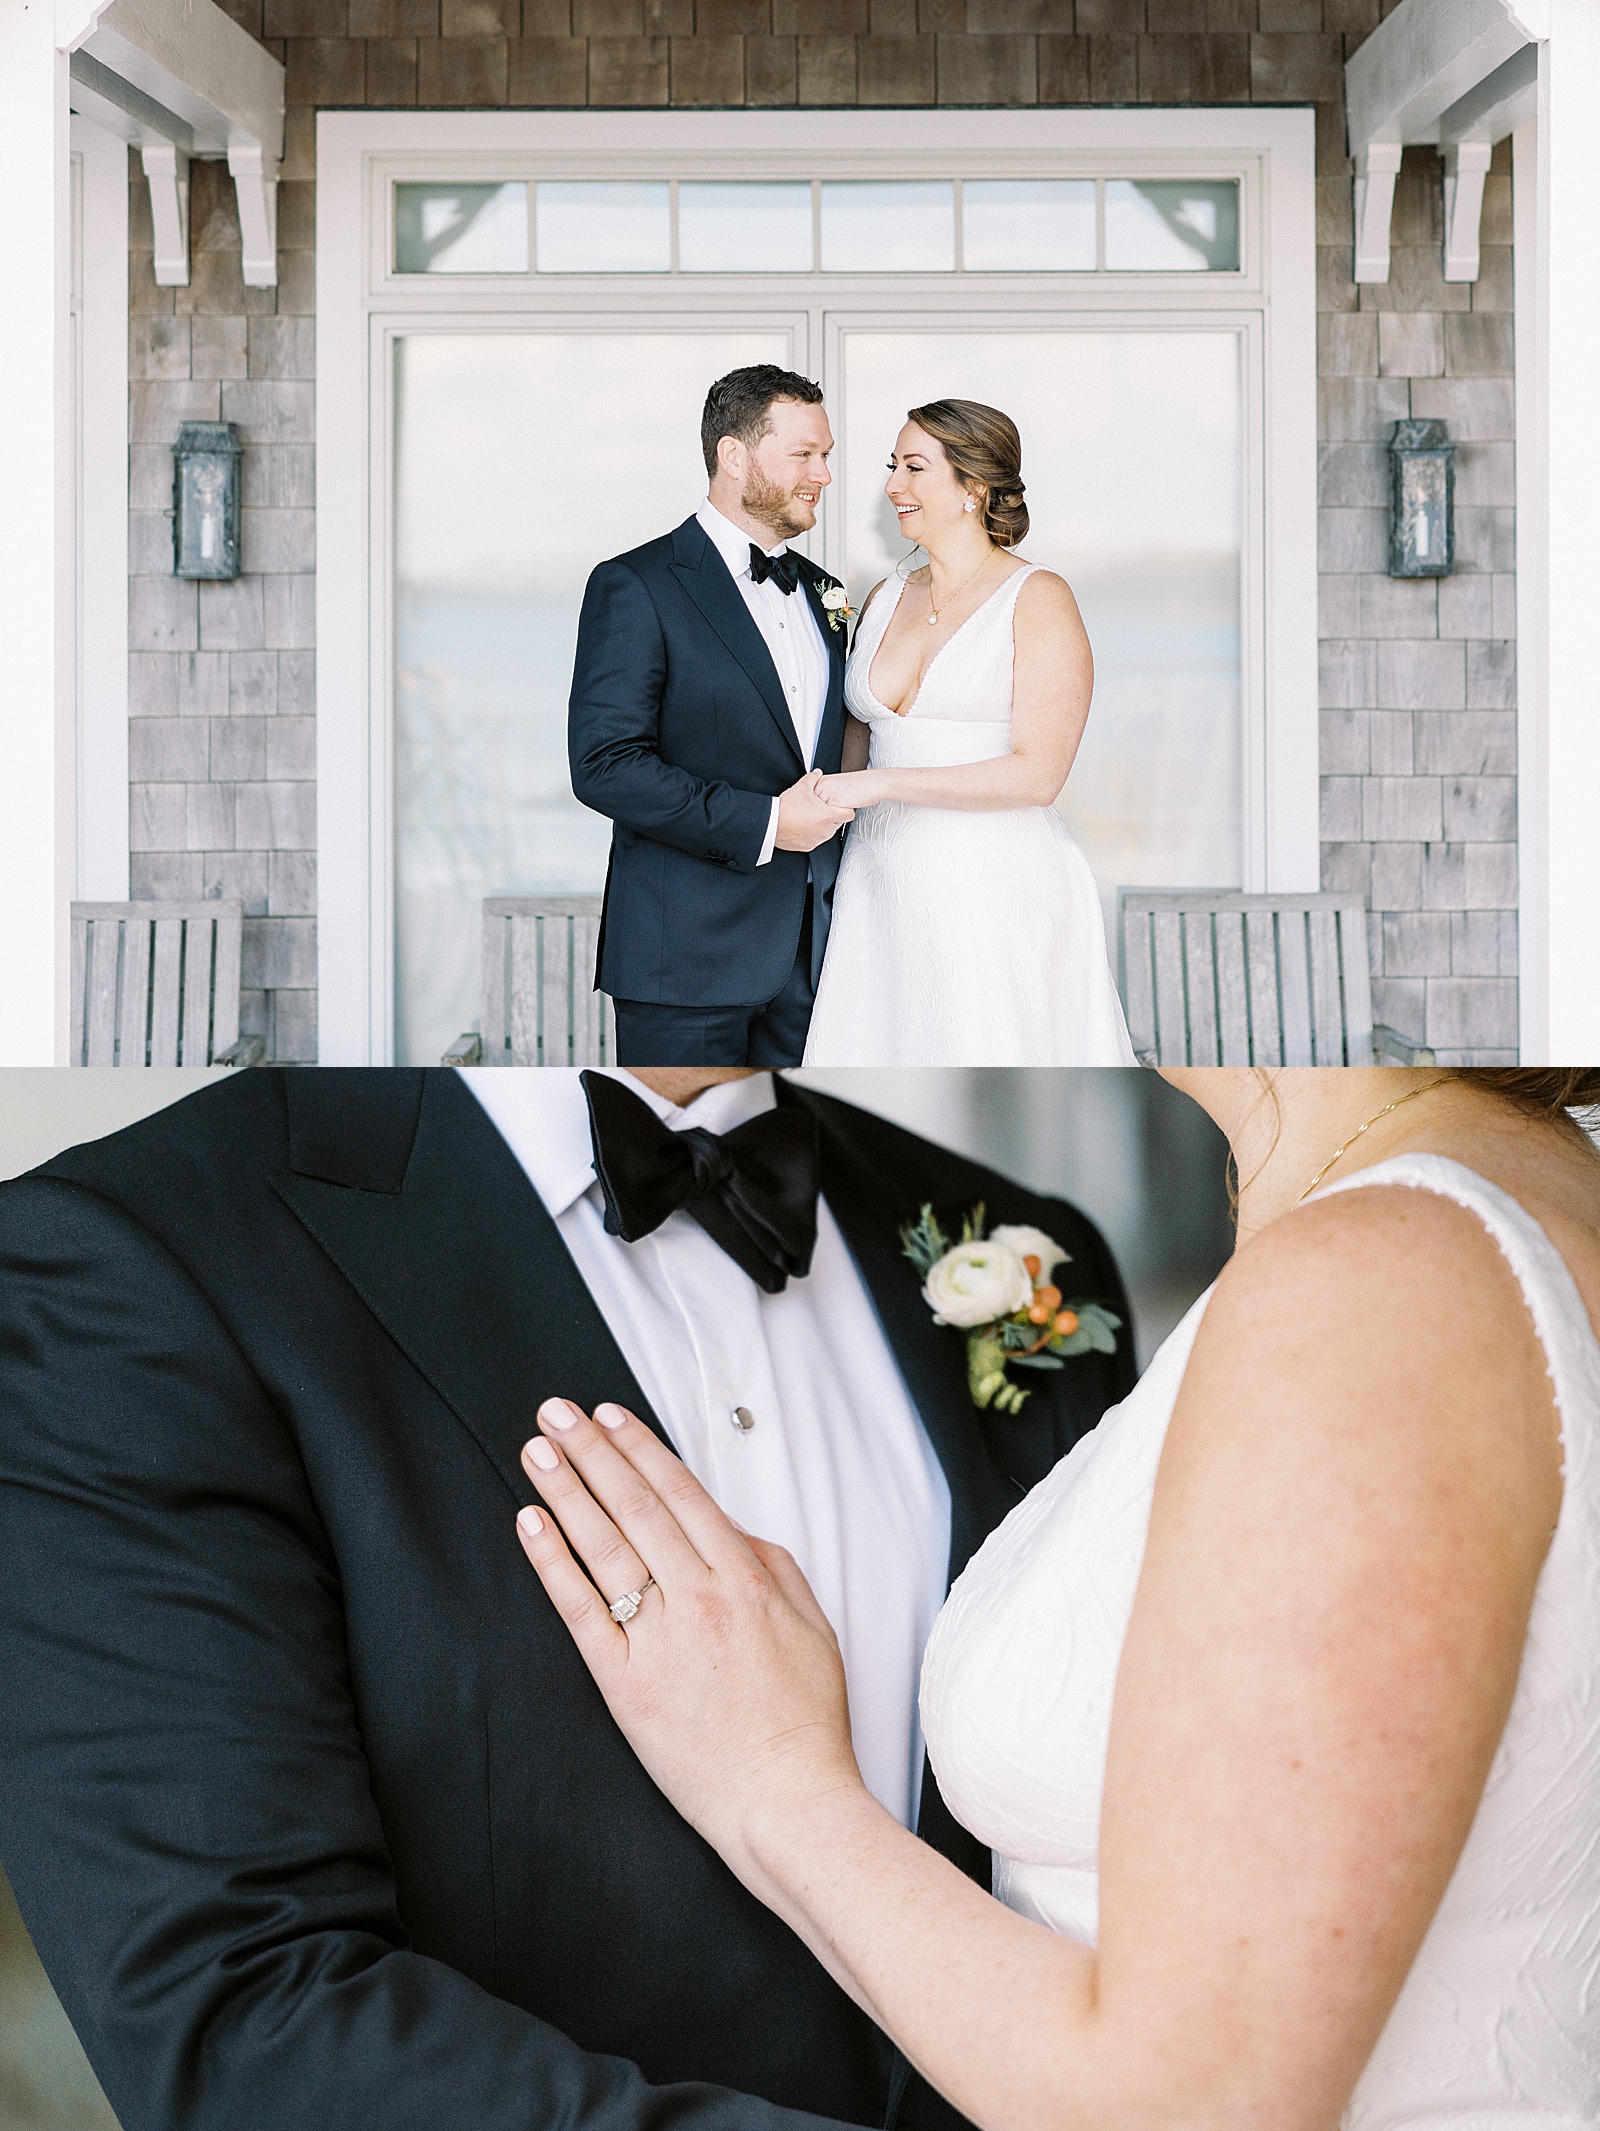 Bride and groom embracing after their first look by a New York Photographer